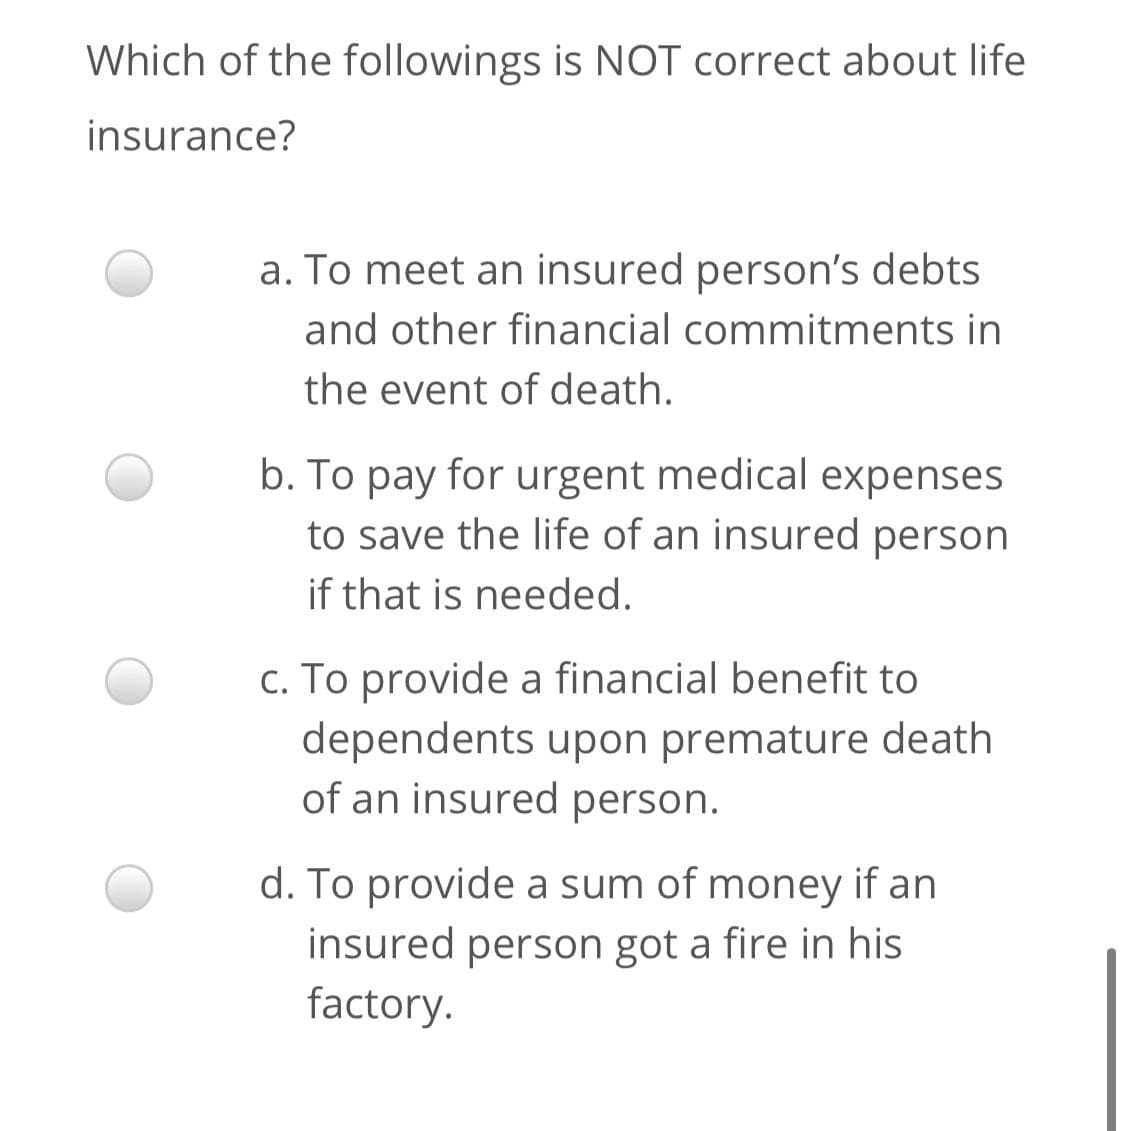 Which of the followings is NOT correct about life
insurance?
a. To meet an insured person's debts
and other financial commitments in
the event of death.
b. To pay for urgent medical expenses
to save the life of an insured person
if that is needed.
c. To provide a financial benefit to
dependents upon premature death
of an insured person.
d. To provide a sum of money if an
insured person got a fire in his
factory.
